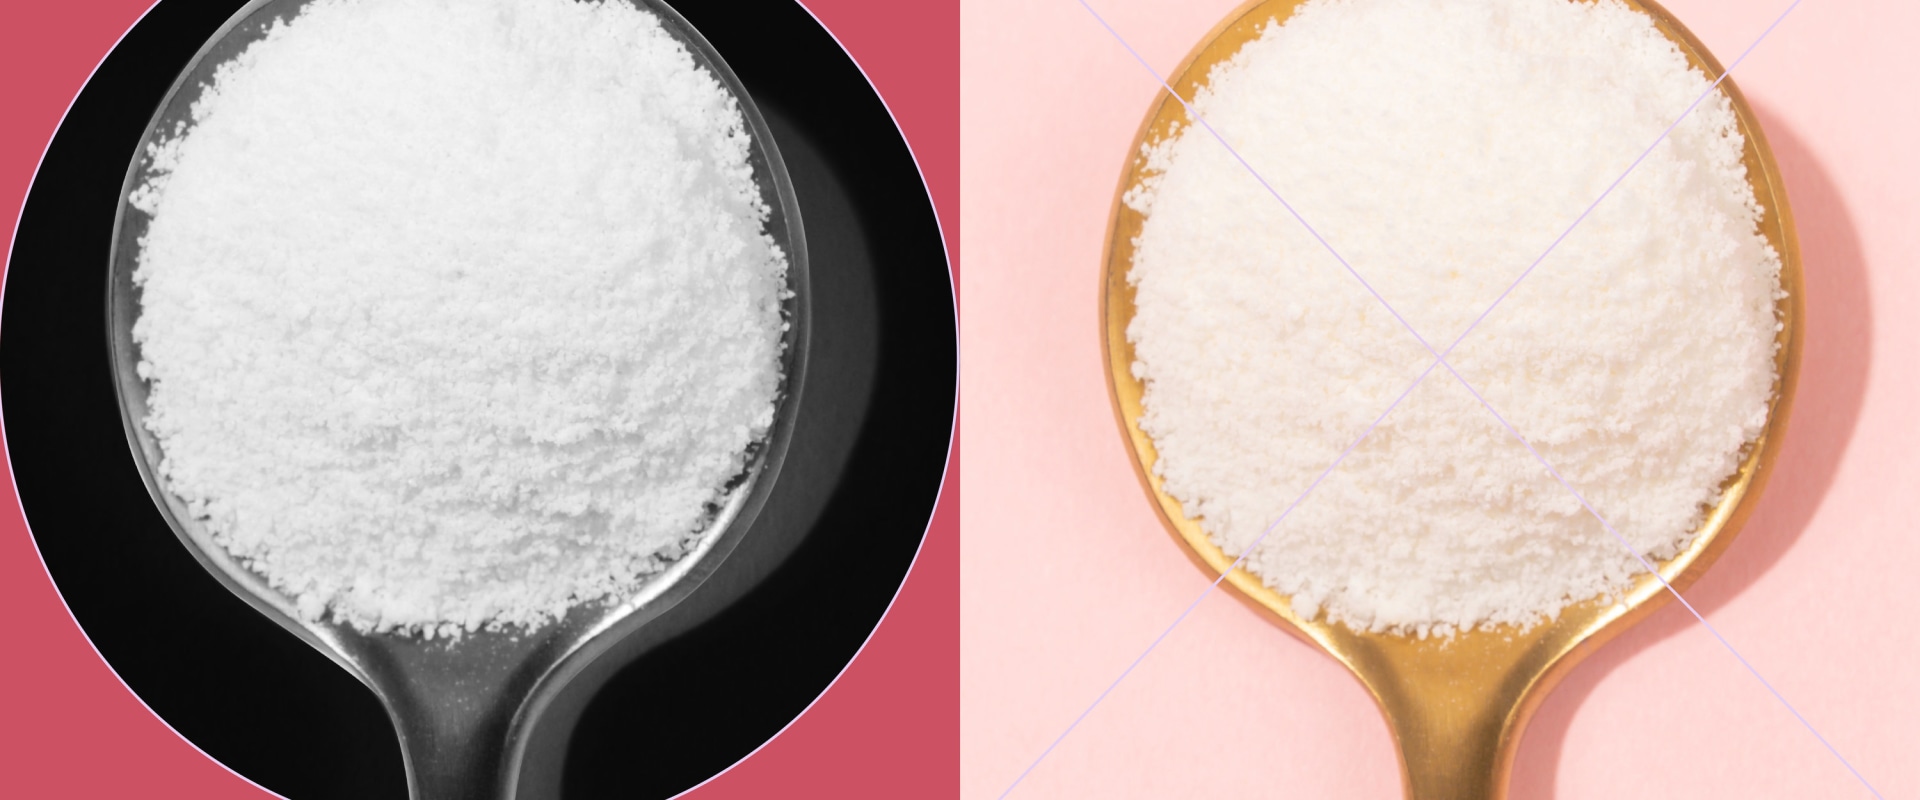 The Science Behind Collagen Powder: How It's Made and What It Does